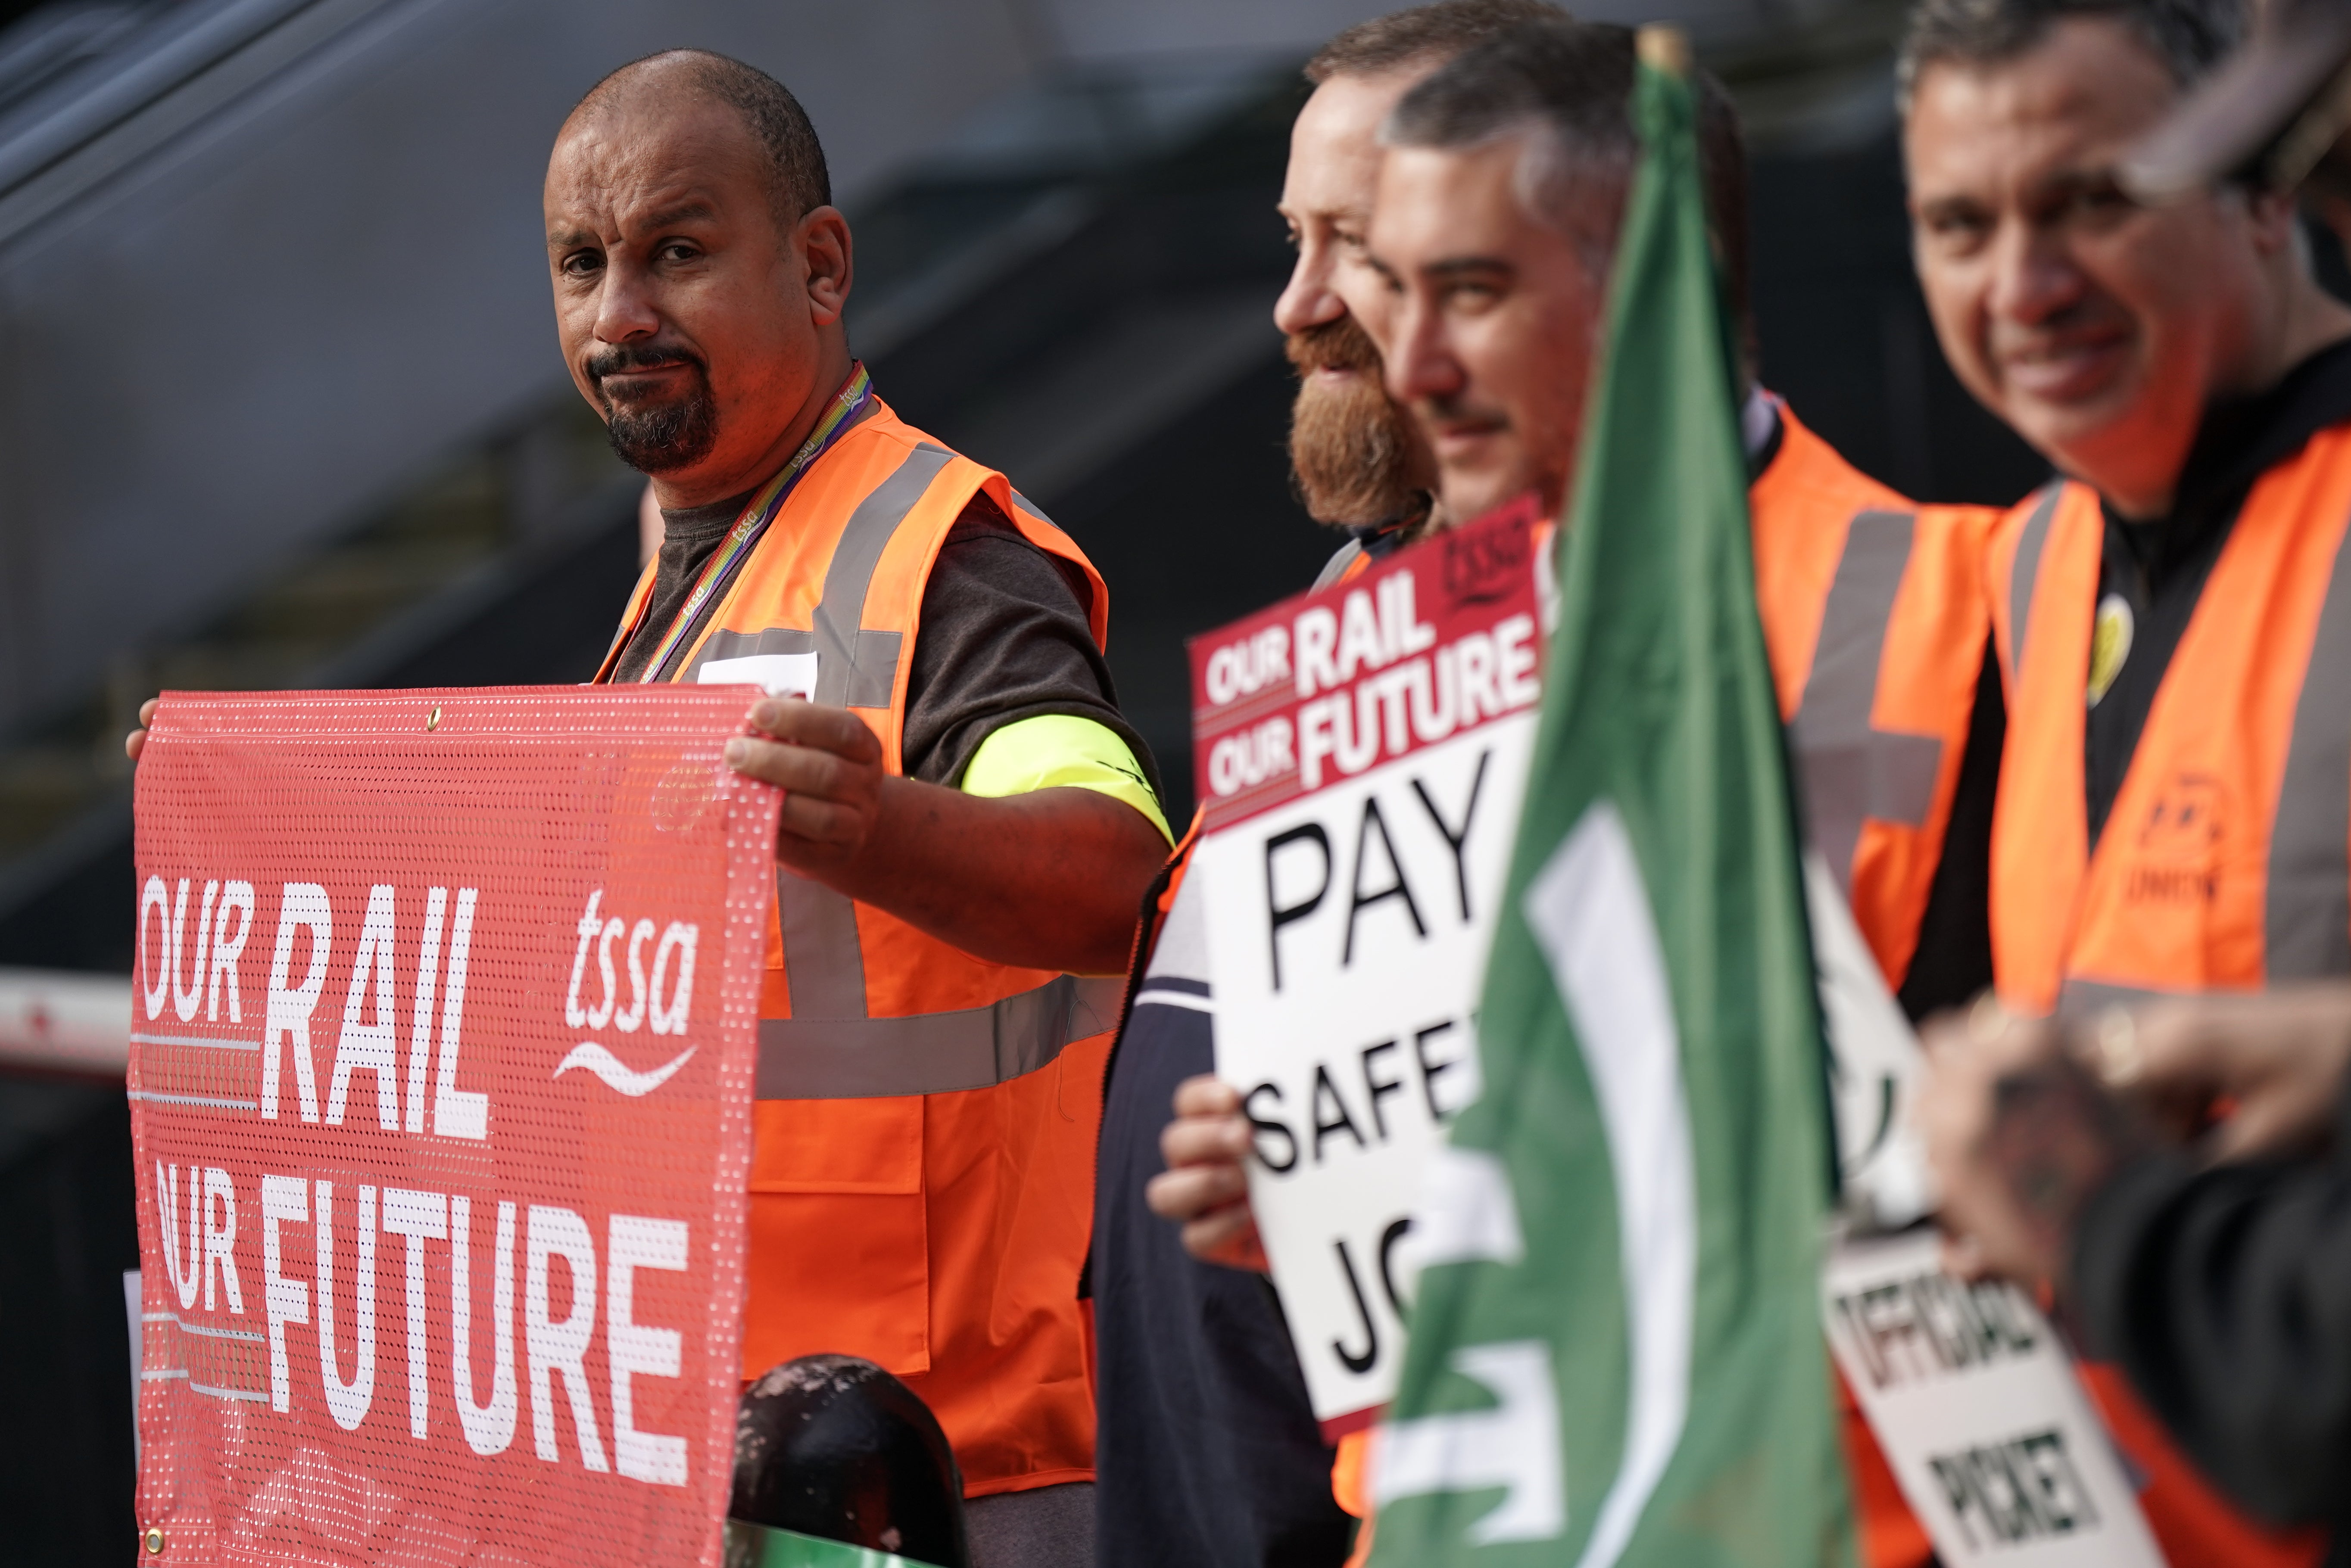 Members of the Transport Salaried Staffs’ Association (TSSA) and the Rail, Maritime and Transport union (RMT) on the picket line outside London Euston train station as members of both unions take part in a fresh strike over jobs, pay and conditions. Picture date: Wednesday July 27, 2022 (Aaron Chown/PA)